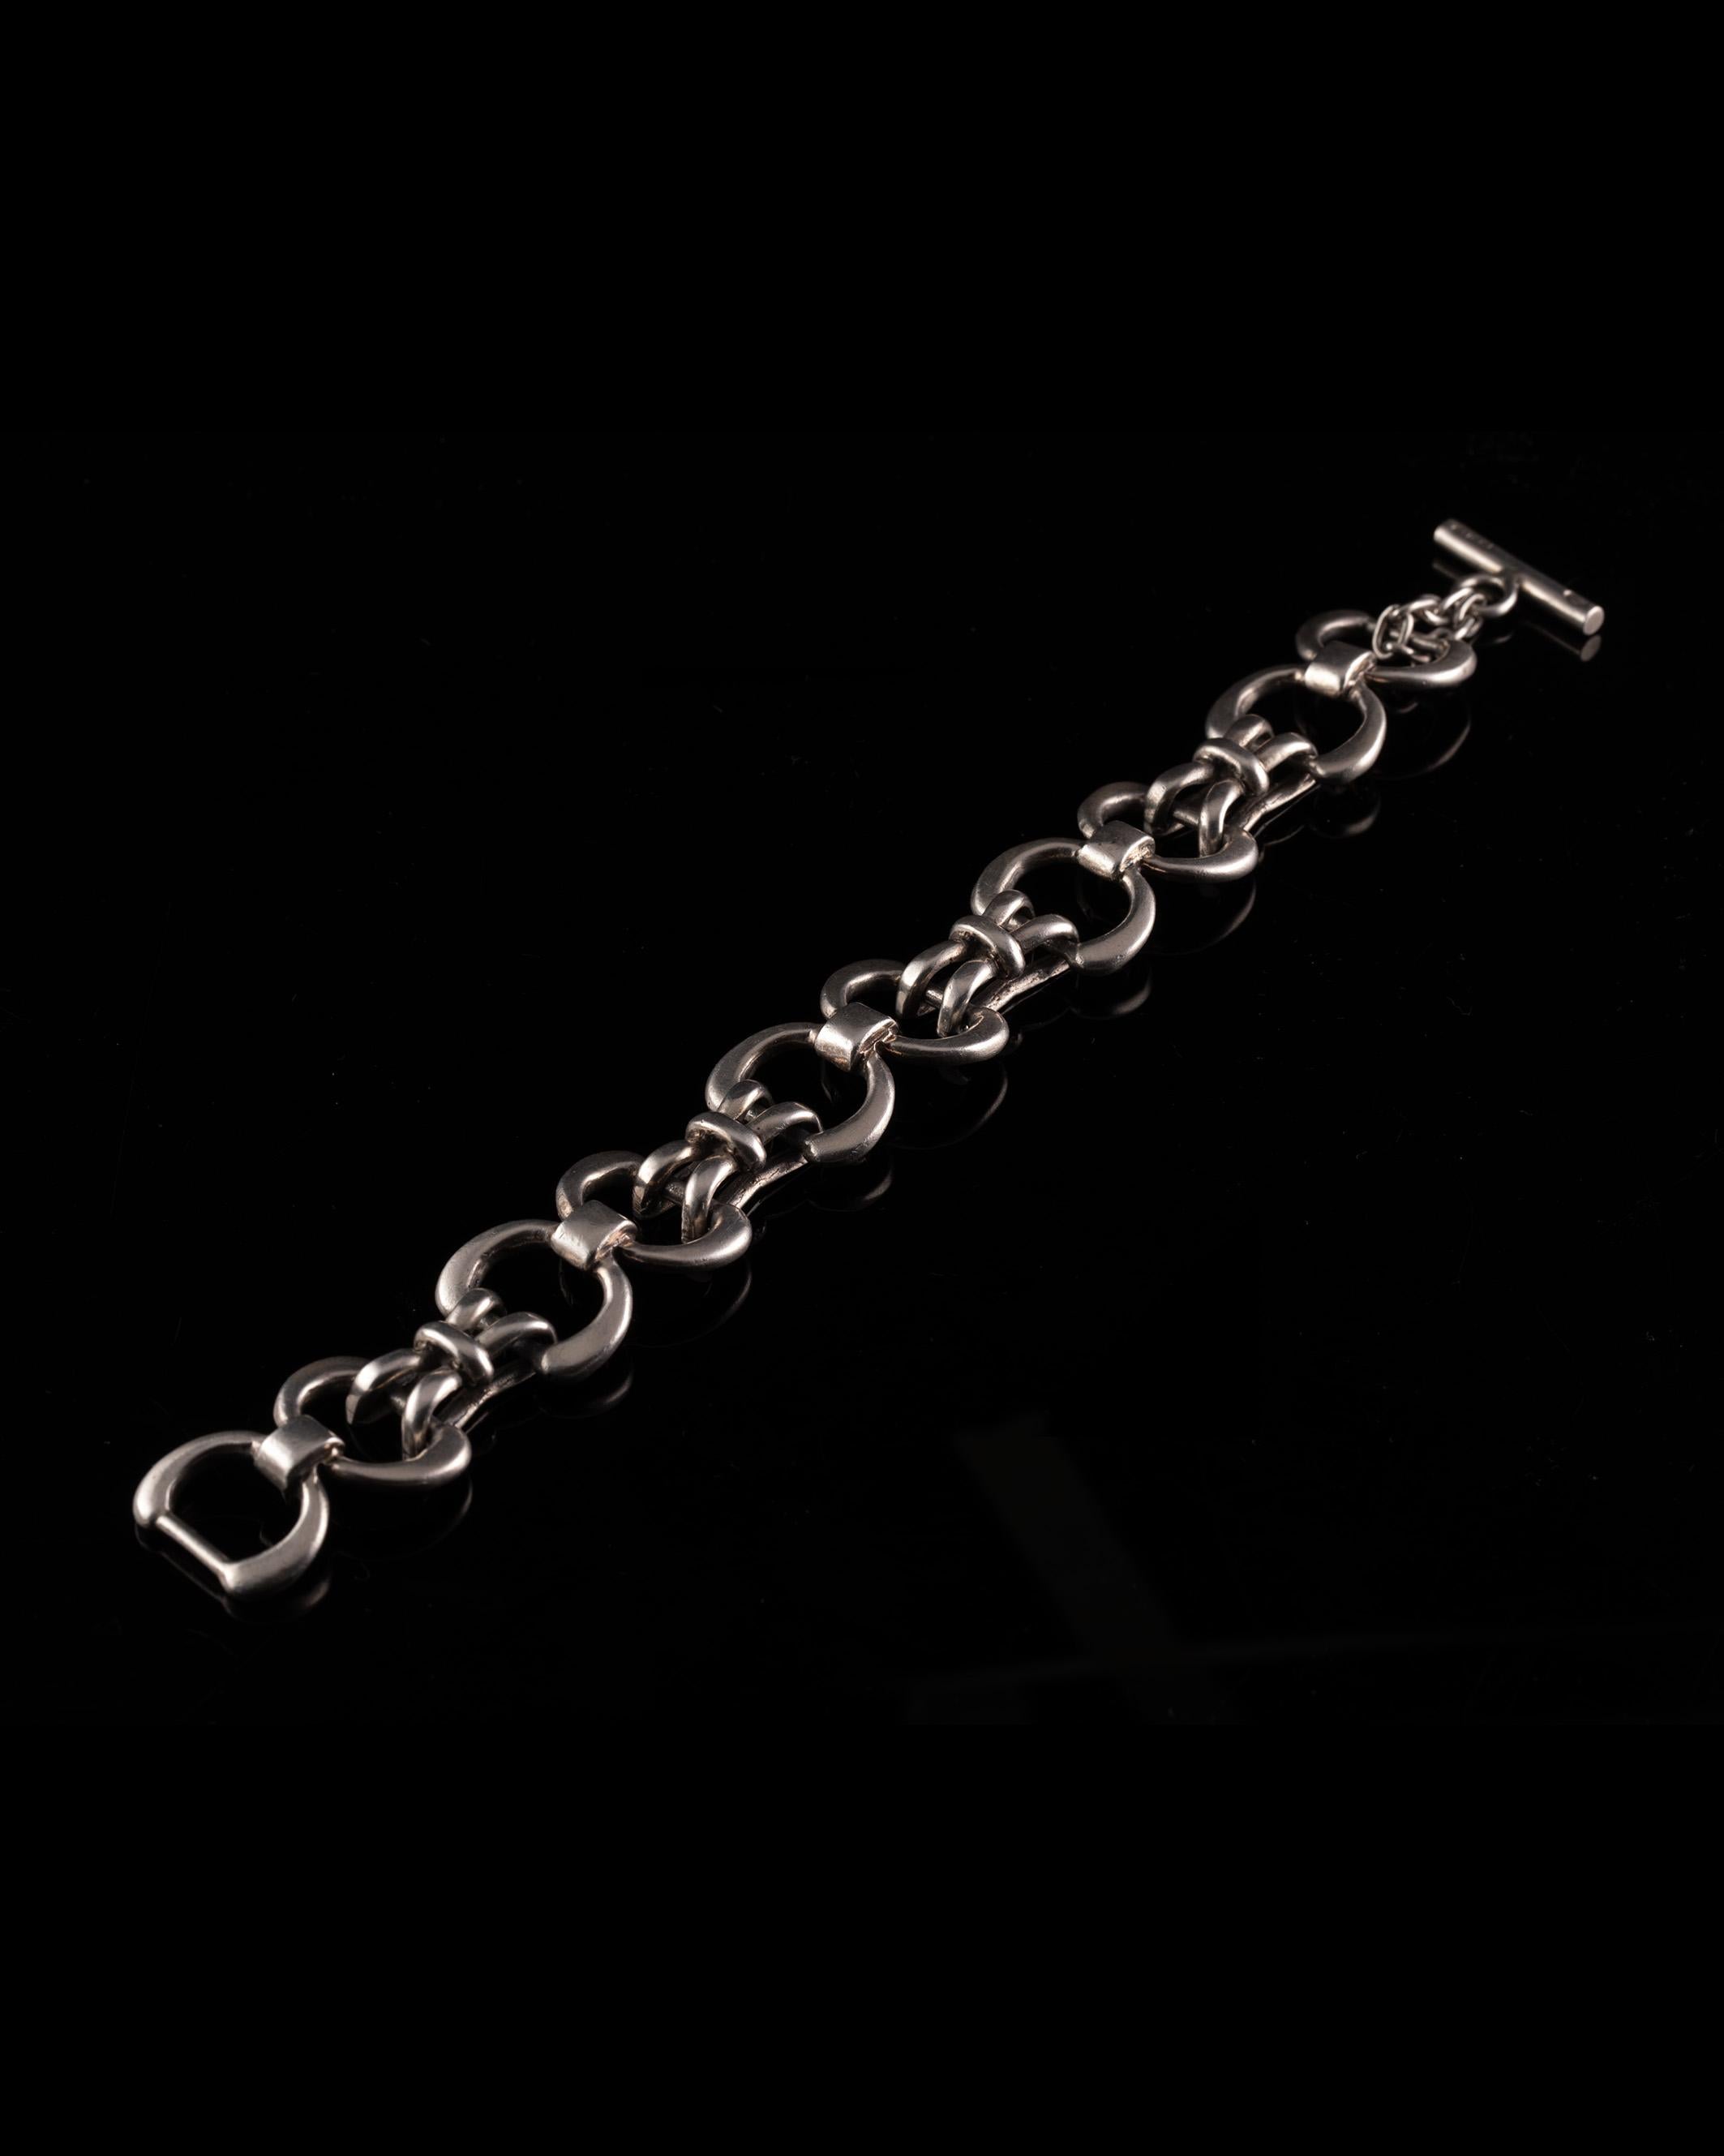 Step back to the 70s with the vintage Gucci bracelet. Made of silver and featuring stylized motifs, it embodies the era's creativity and sophistication. This timeless piece is a conversation starter, symbolizing individuality and an appreciation for